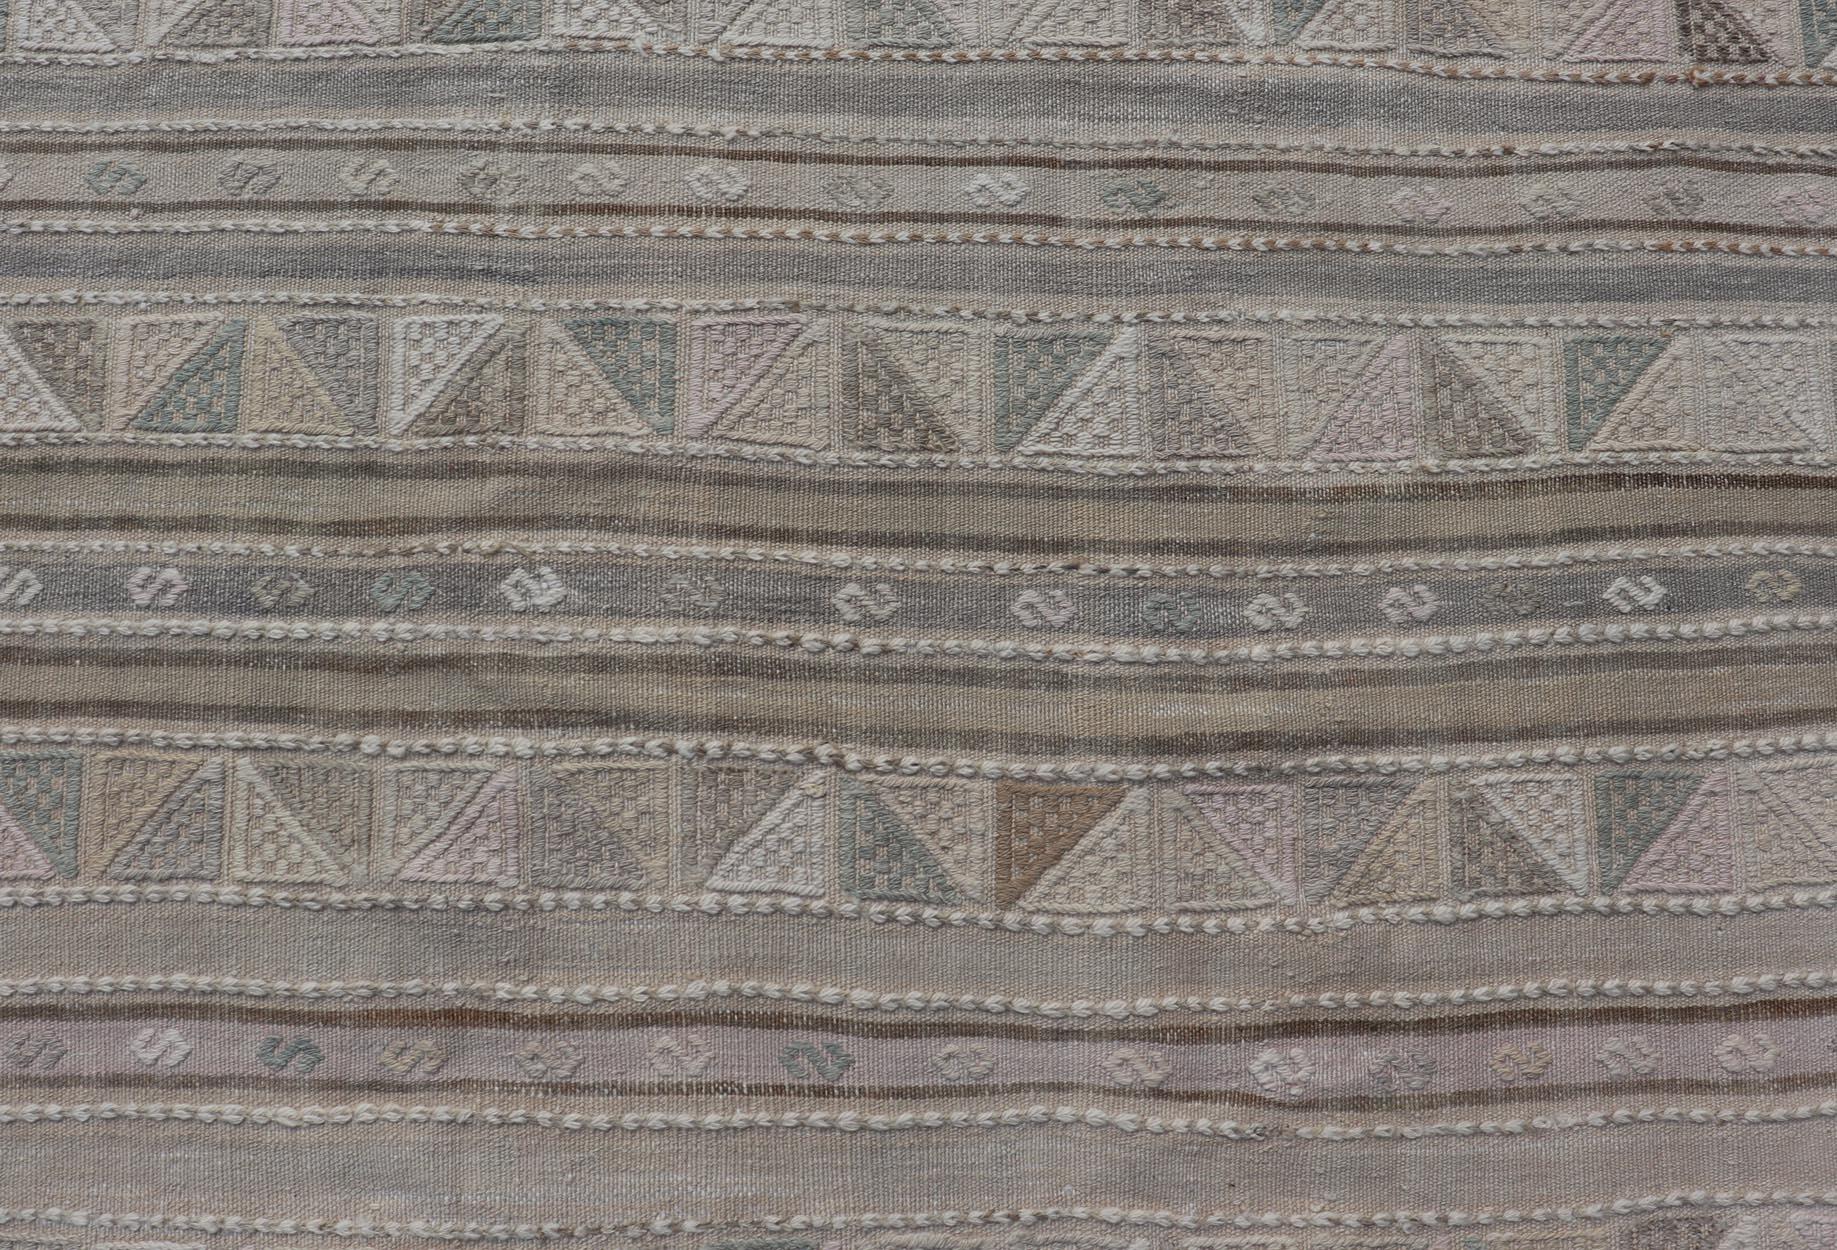 Turkish Flat-Weave with Embroideries Kilim in Taupe, Green, Brown, and Tan In Good Condition For Sale In Atlanta, GA